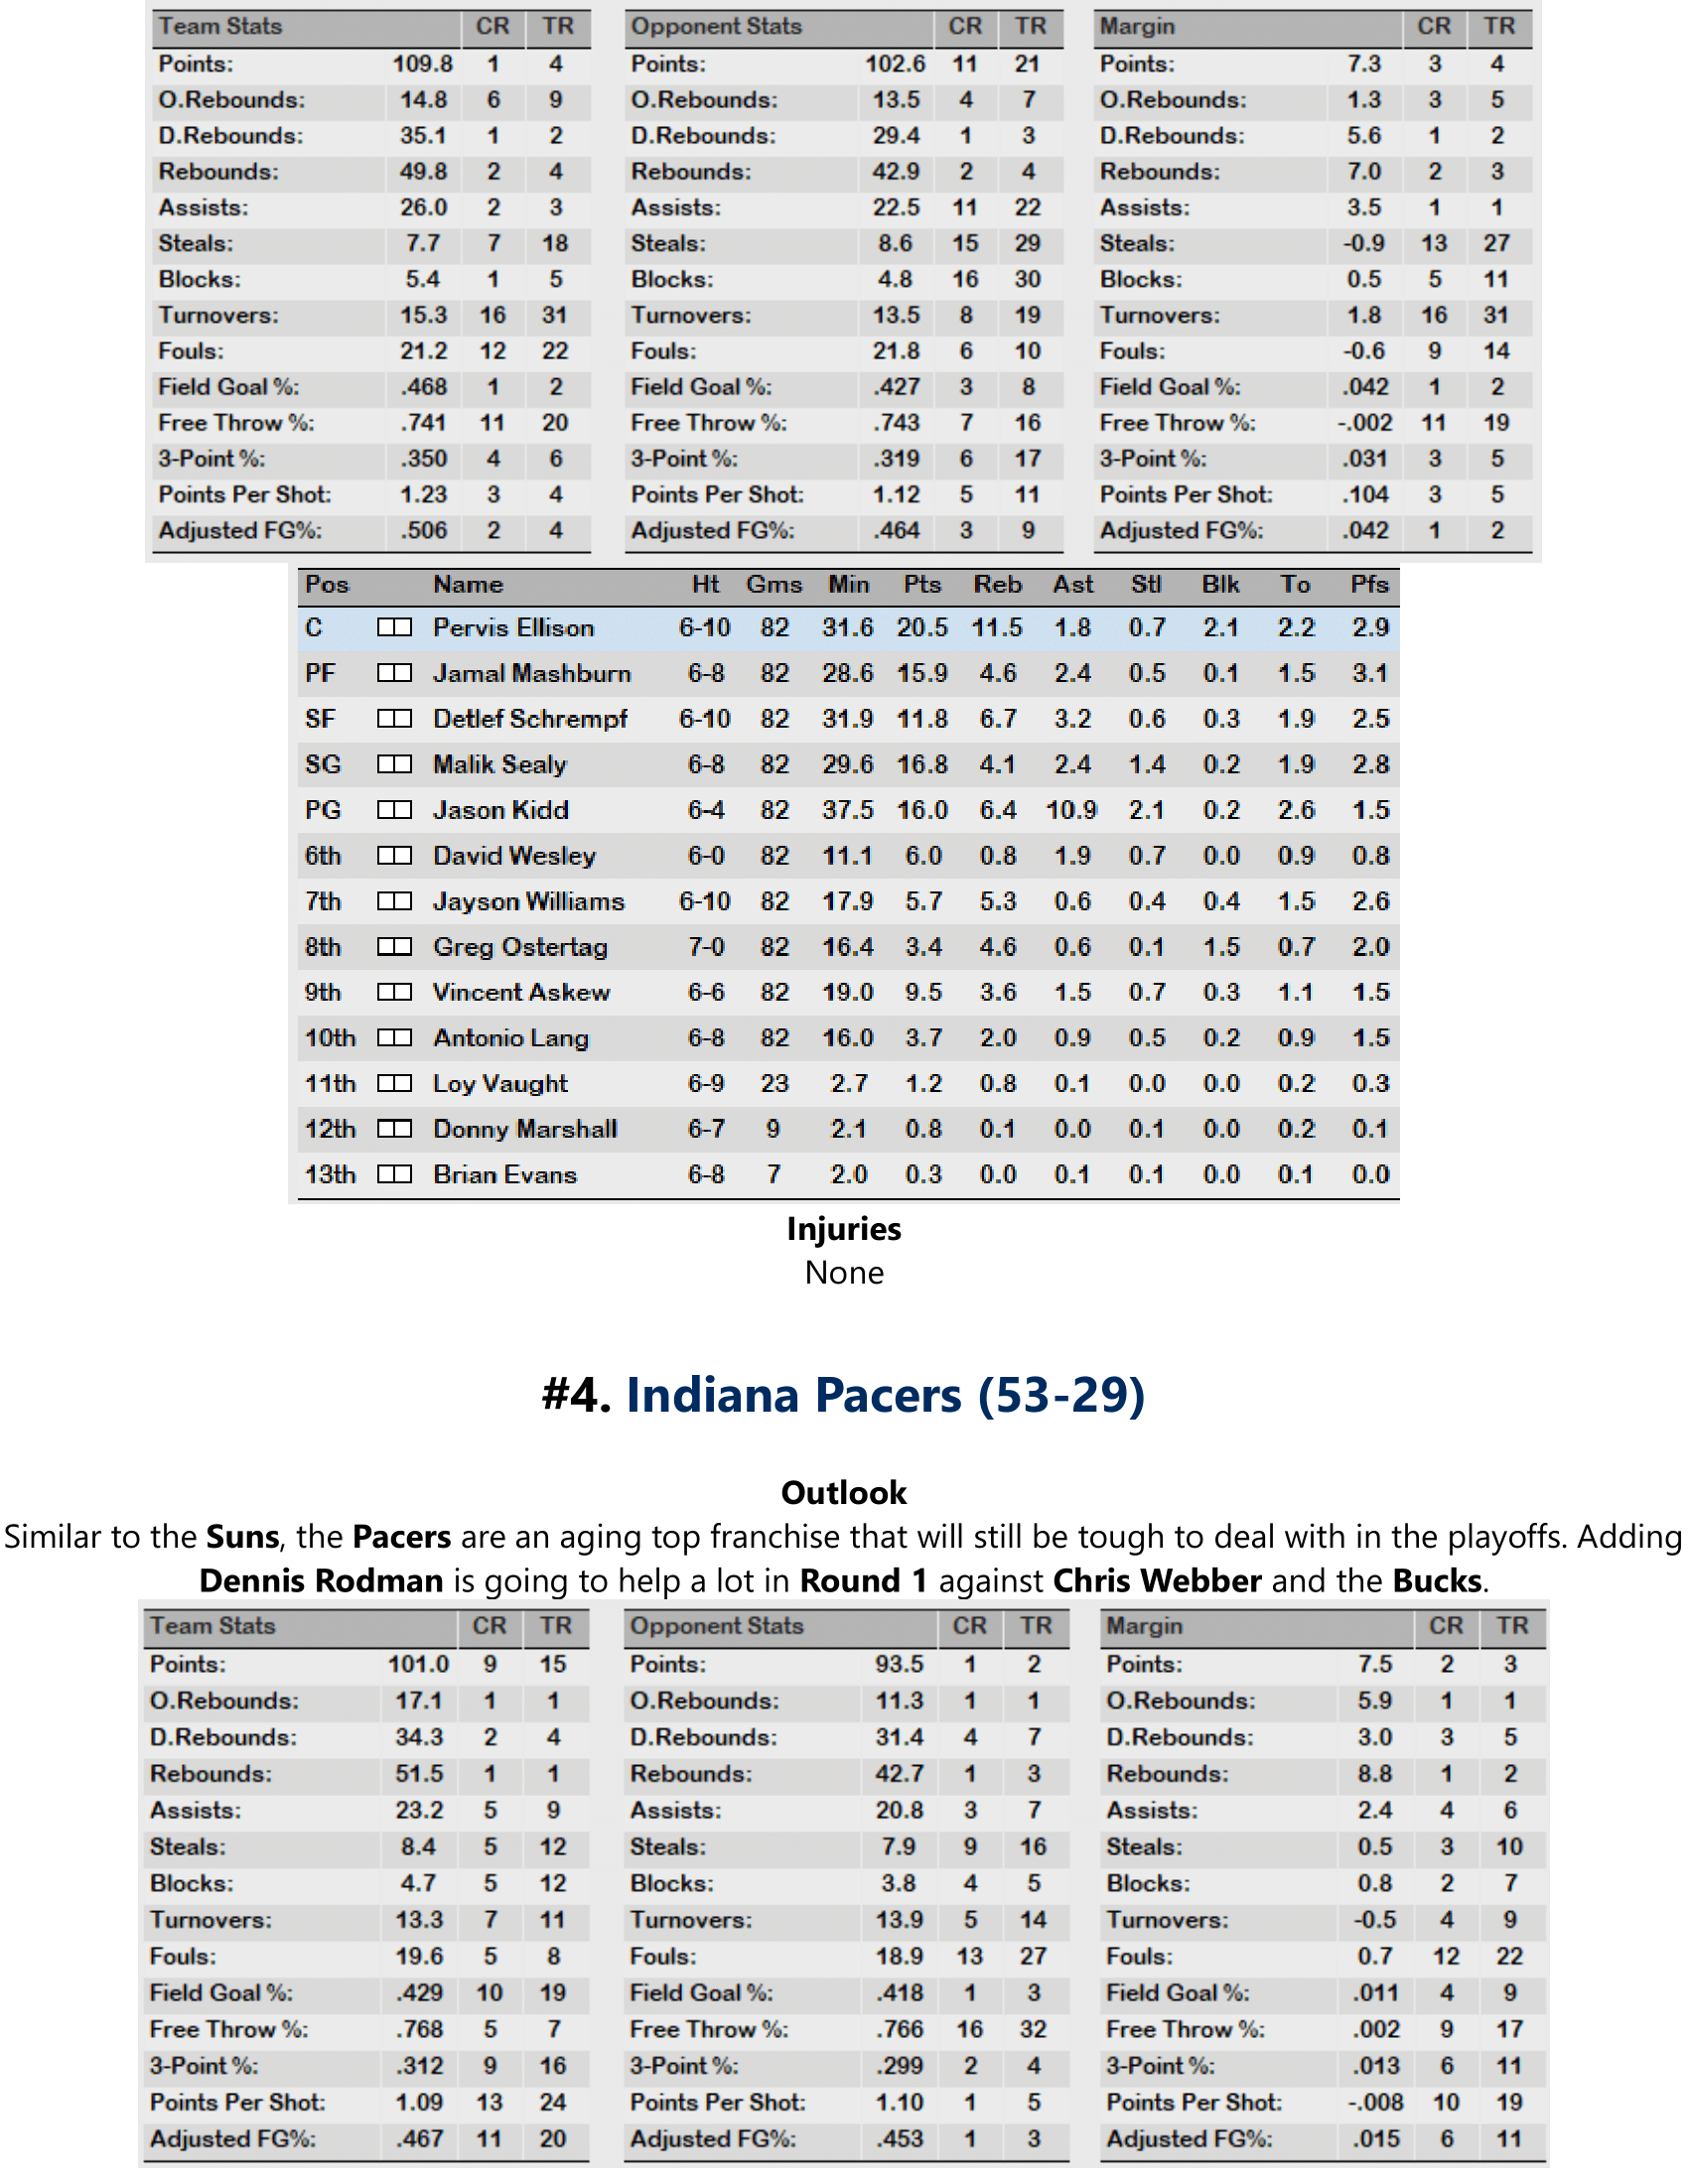 96-97-Part-3-Playoff-Preview-11.png